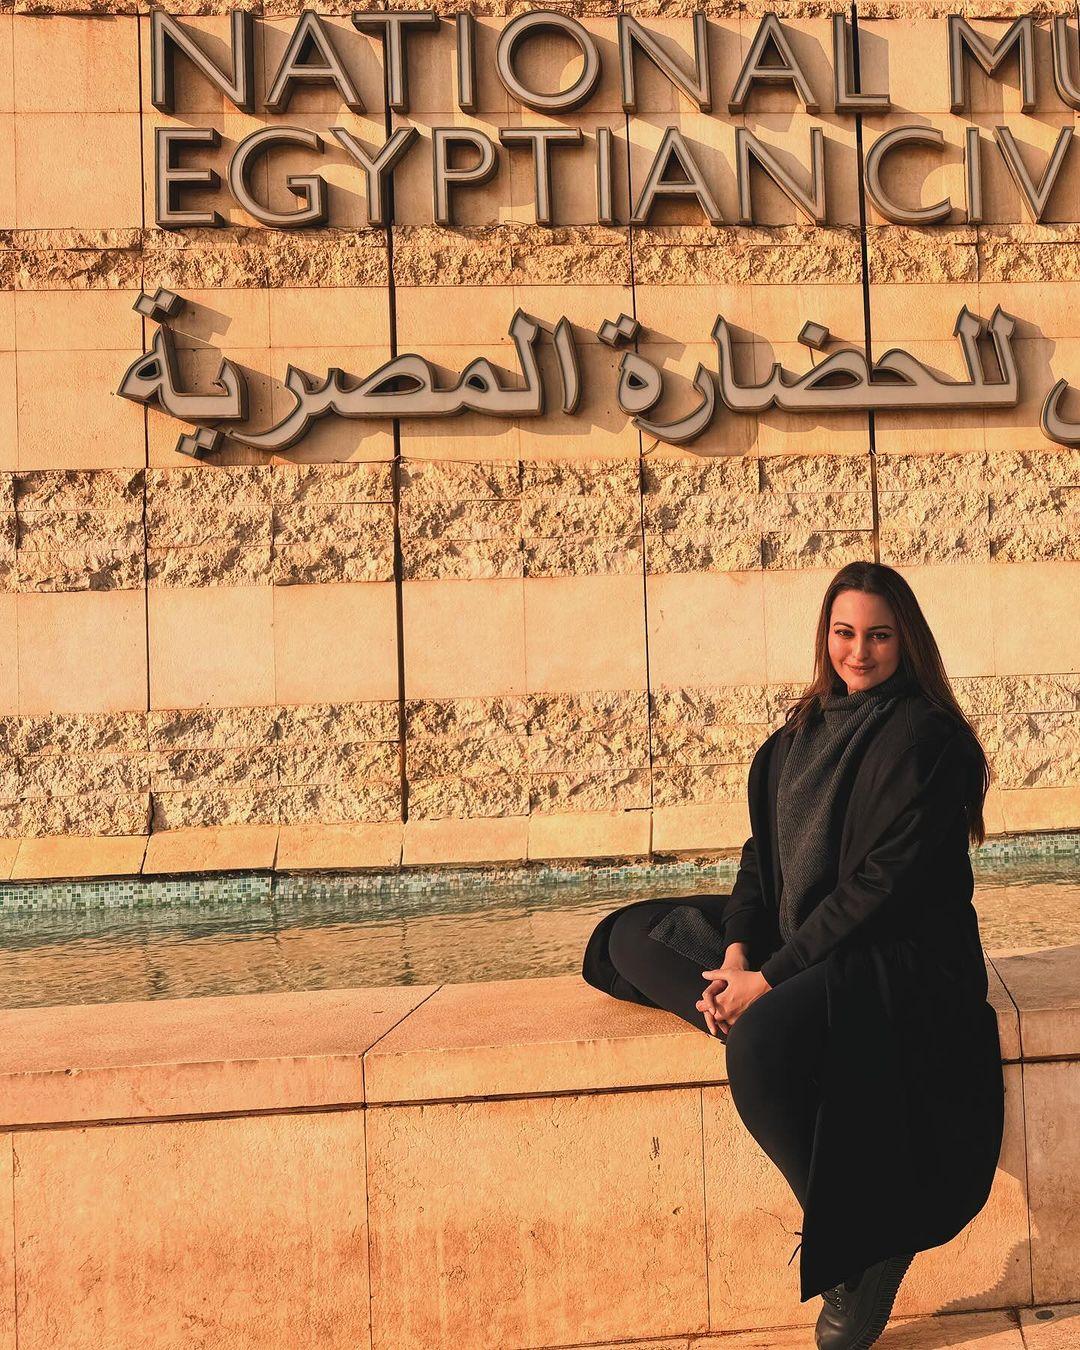 Sonakshi Sinha is ringing in the New Year in Egypt